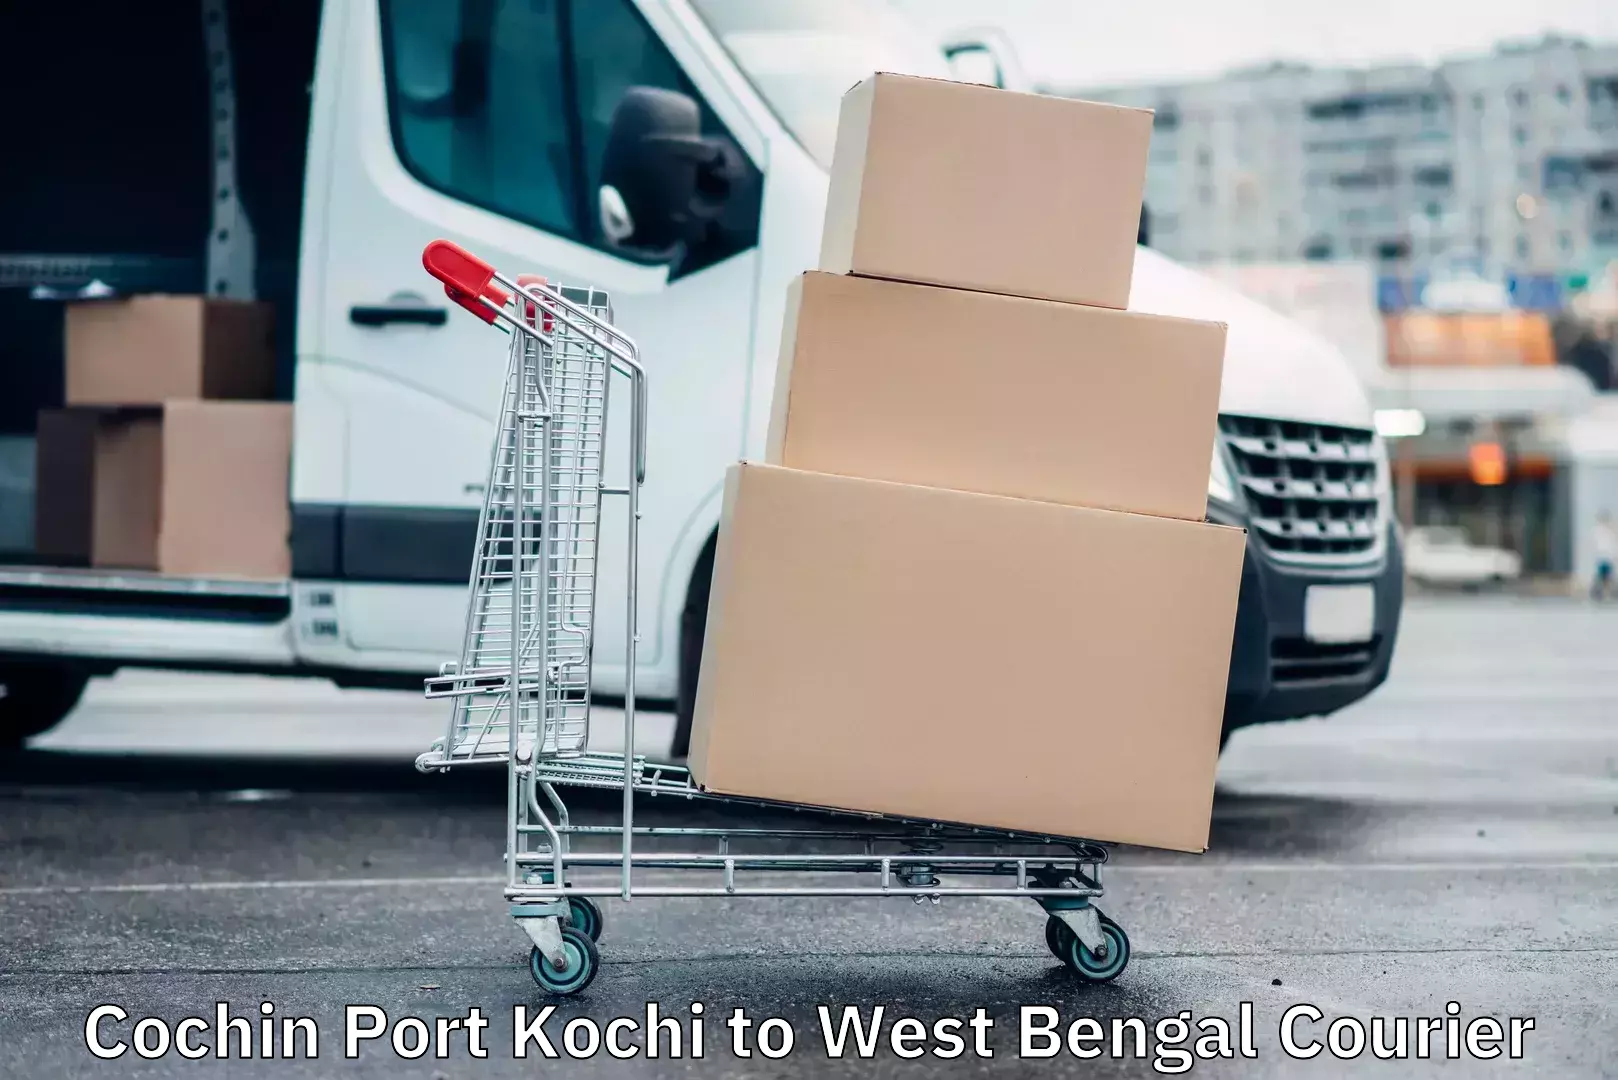 Nationwide parcel services Cochin Port Kochi to Lodhan